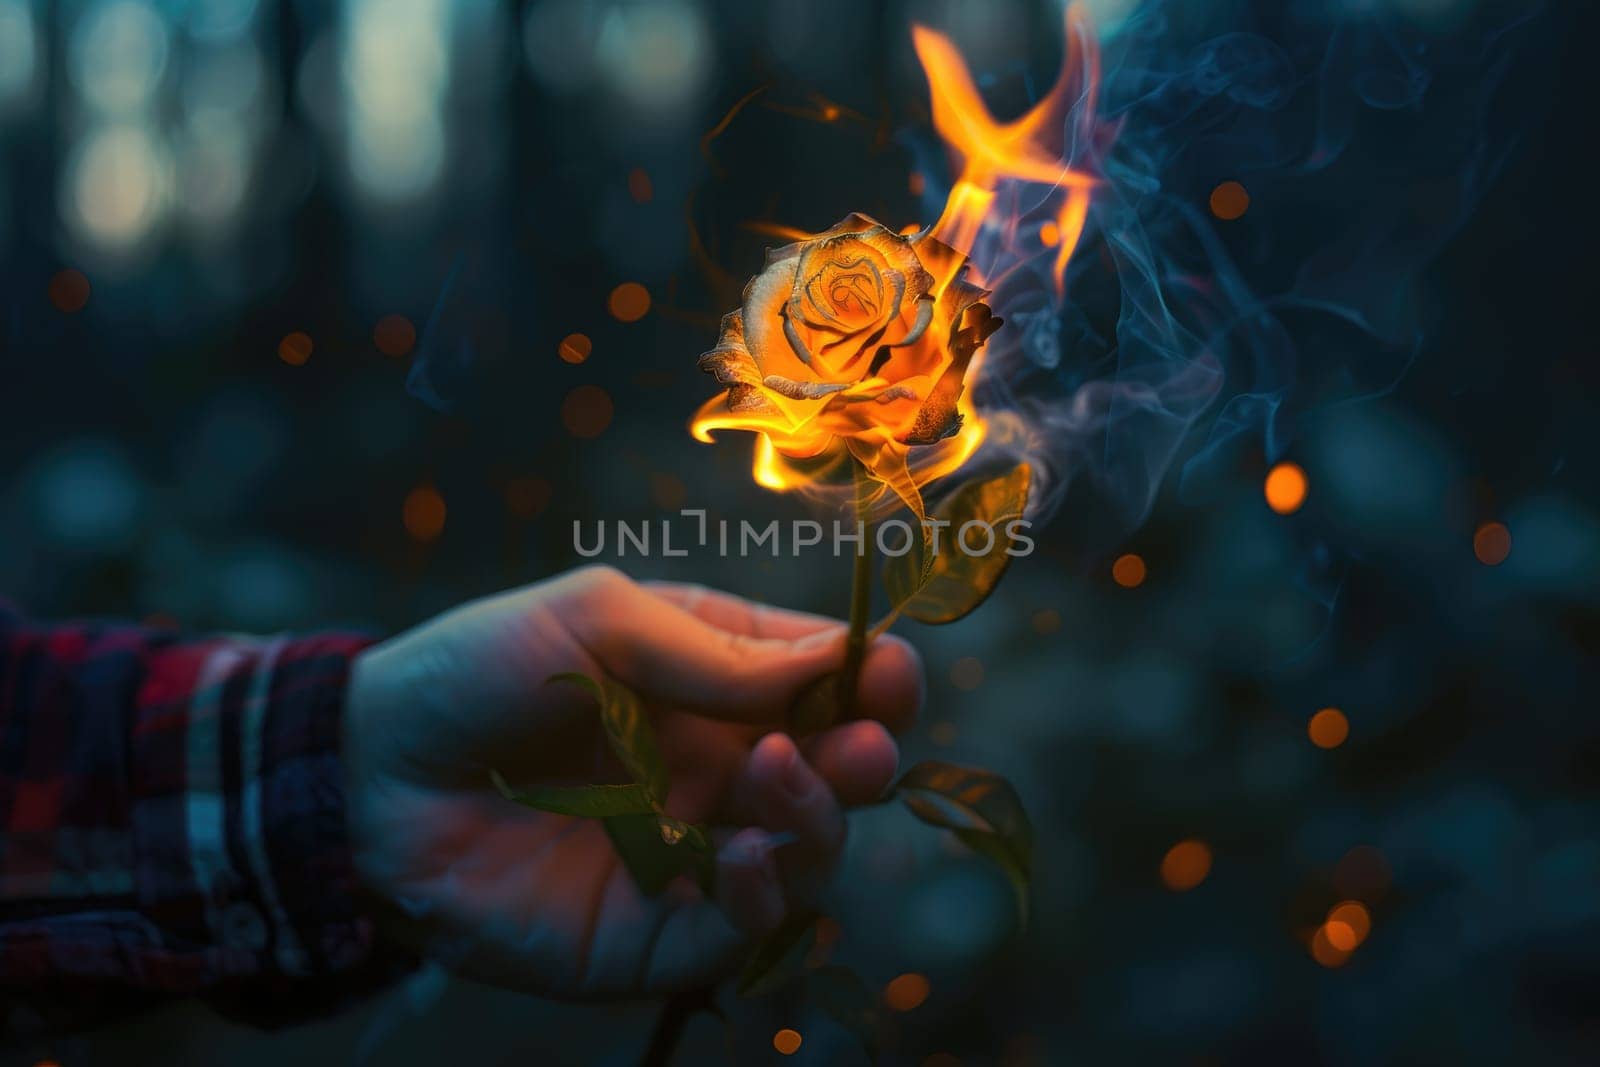 photo of Rose in from of burn on fire on left hand, minimalistic background. by Chawagen